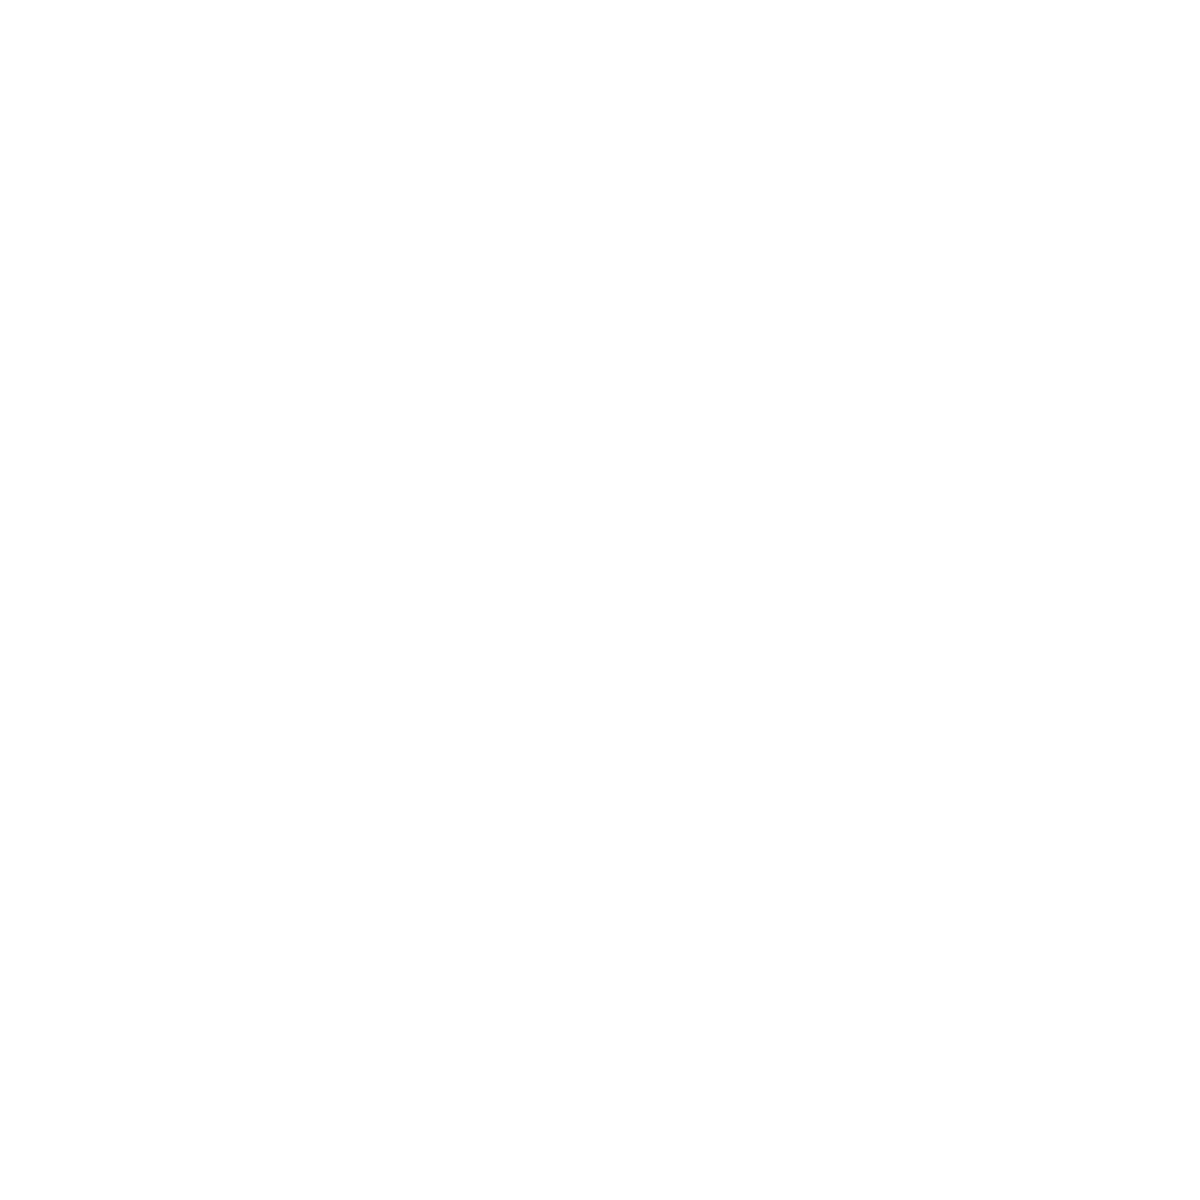 The Sycamore Collective